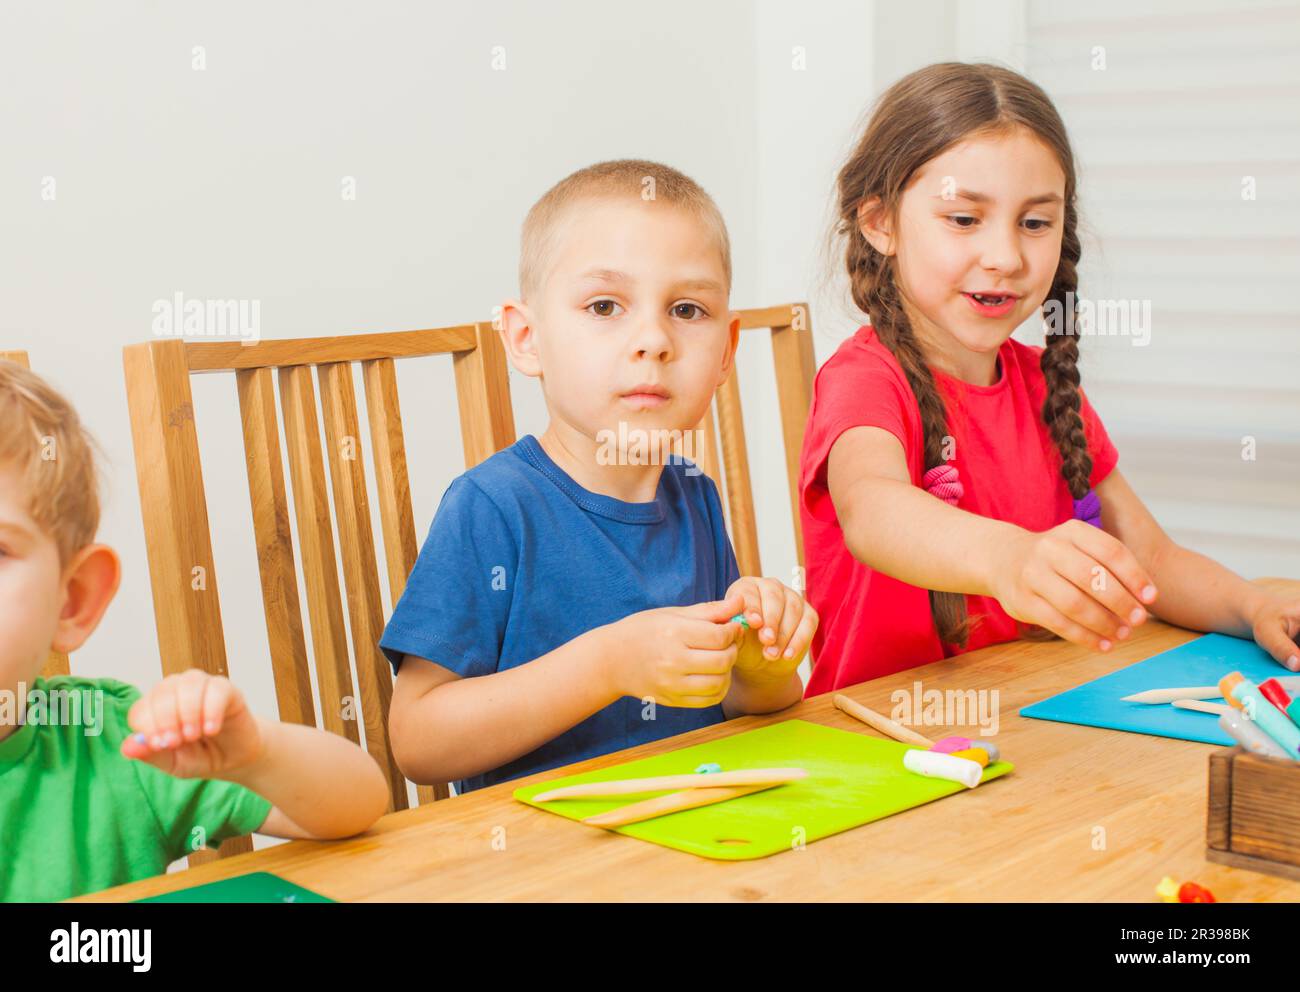 Creative kids having fun together with colorful modeling clay Stock Photo